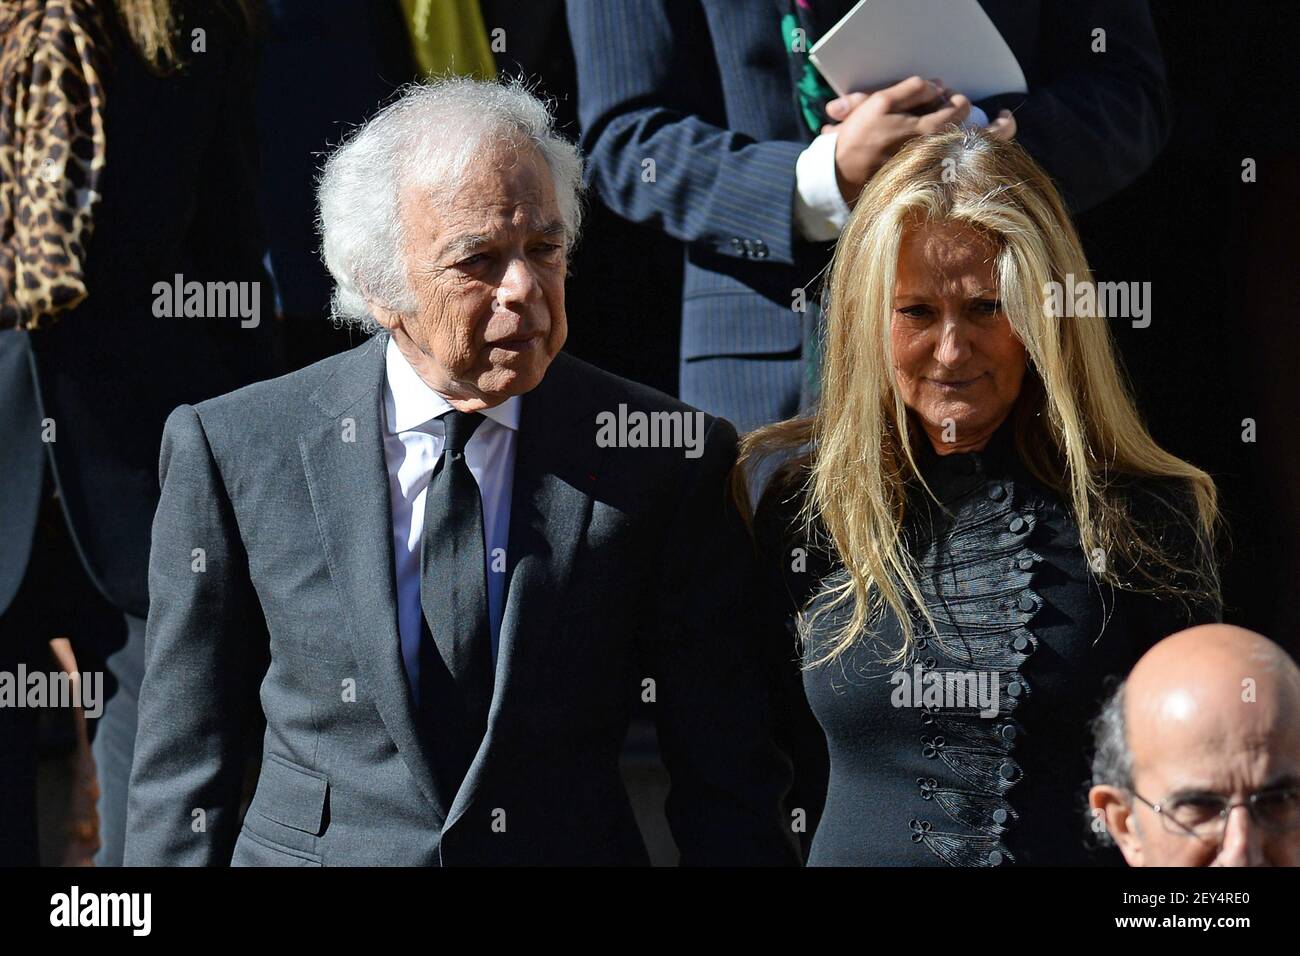 American fashion designer Ralph Lauren and wife Ricky Anne Loew-Beer attend  the memorial service for fashion designer Oscar de la Renta at The Church  of St. Ignatius Loyola on Park Avenue in